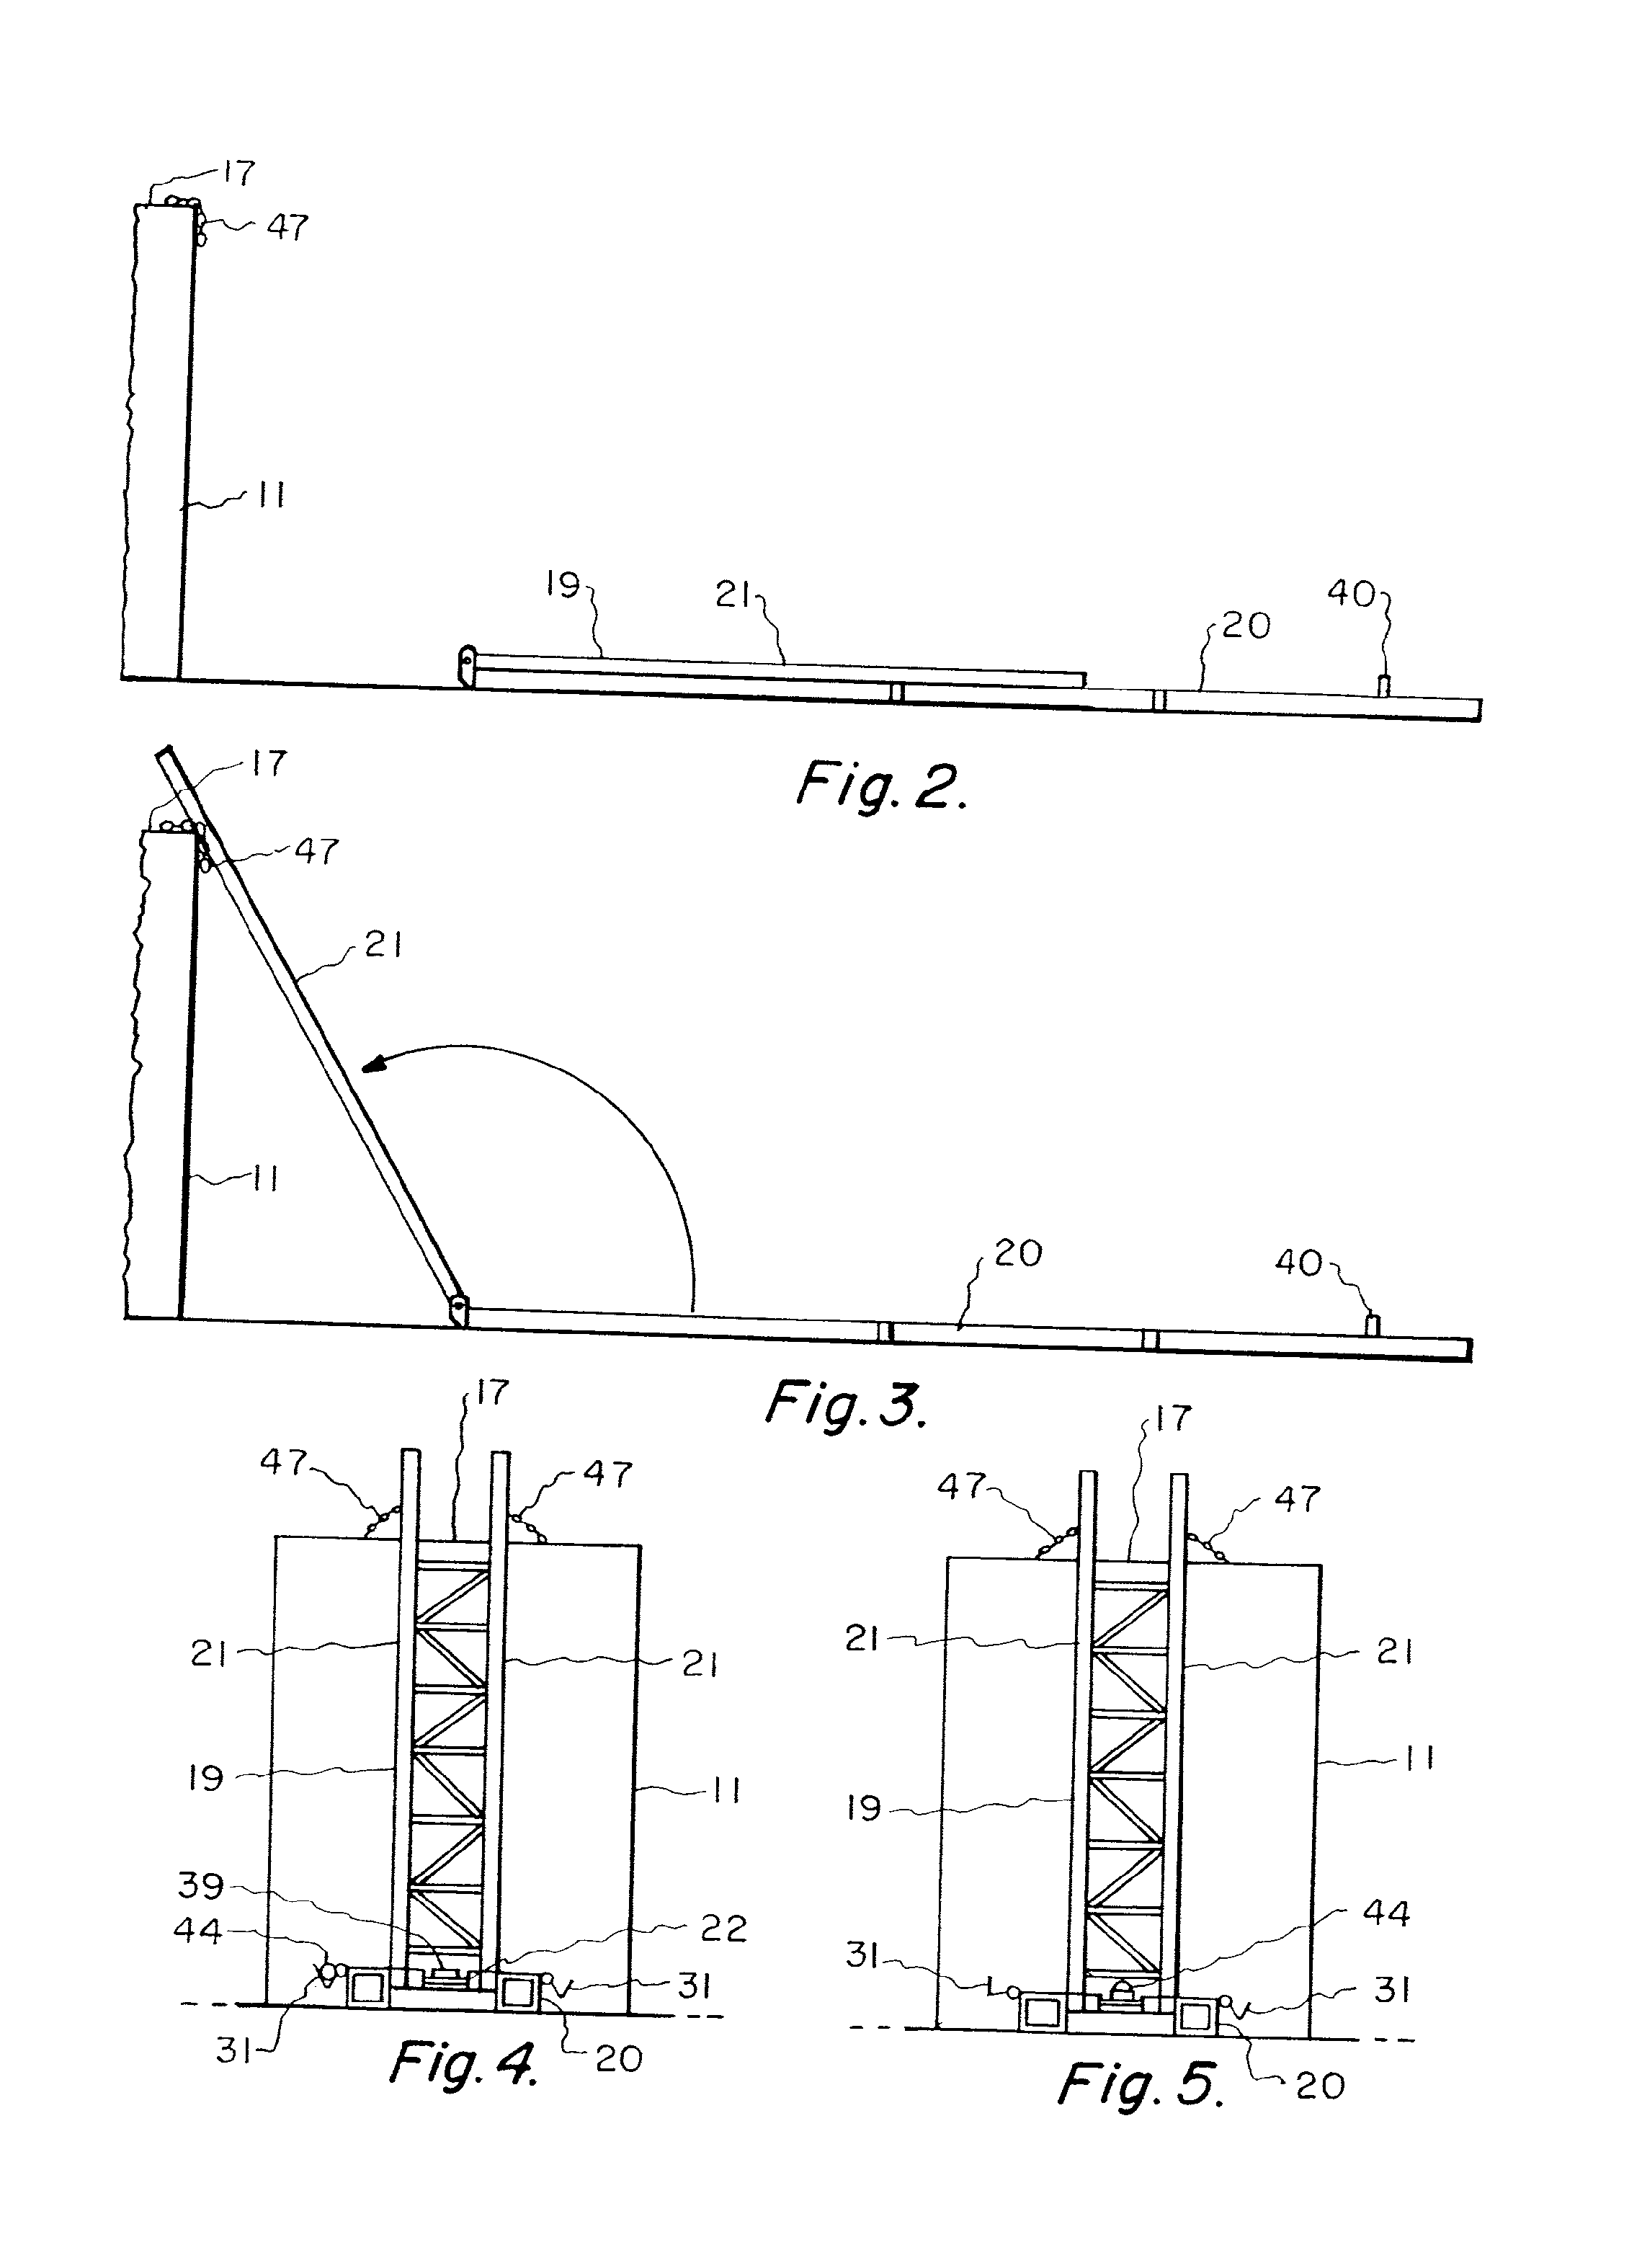 Portable drill pipe handling apparatus for use with oil and gas well drilling rigs